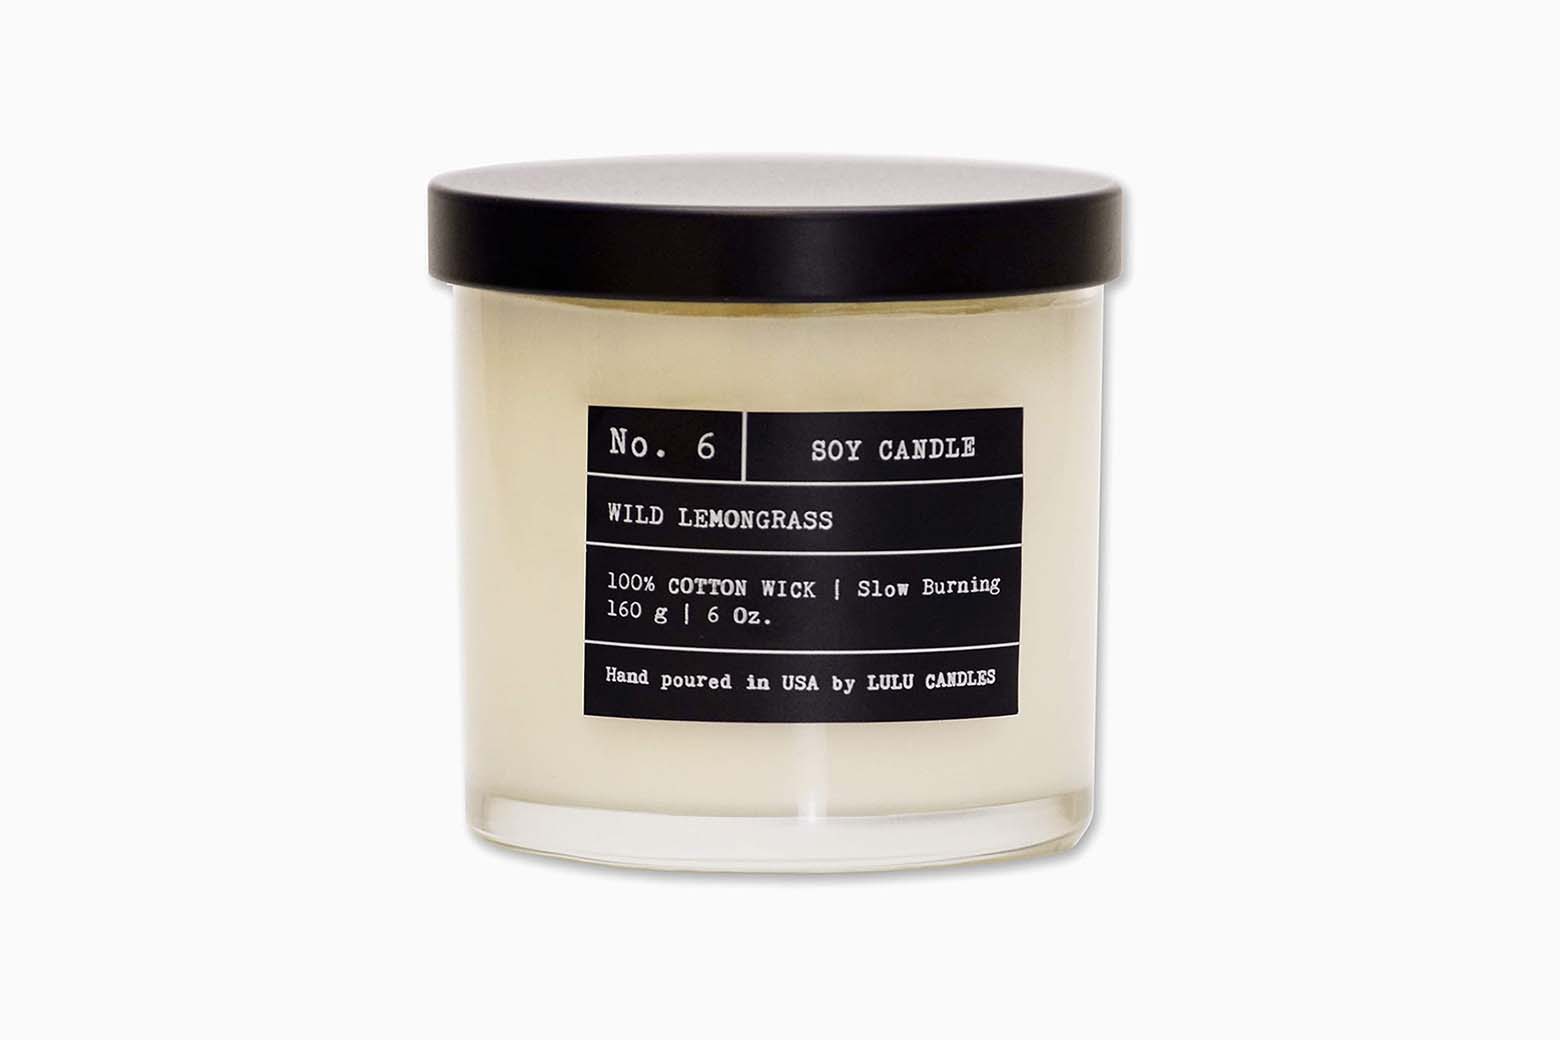 21 Best Scented Candles: Amazing Home Scents